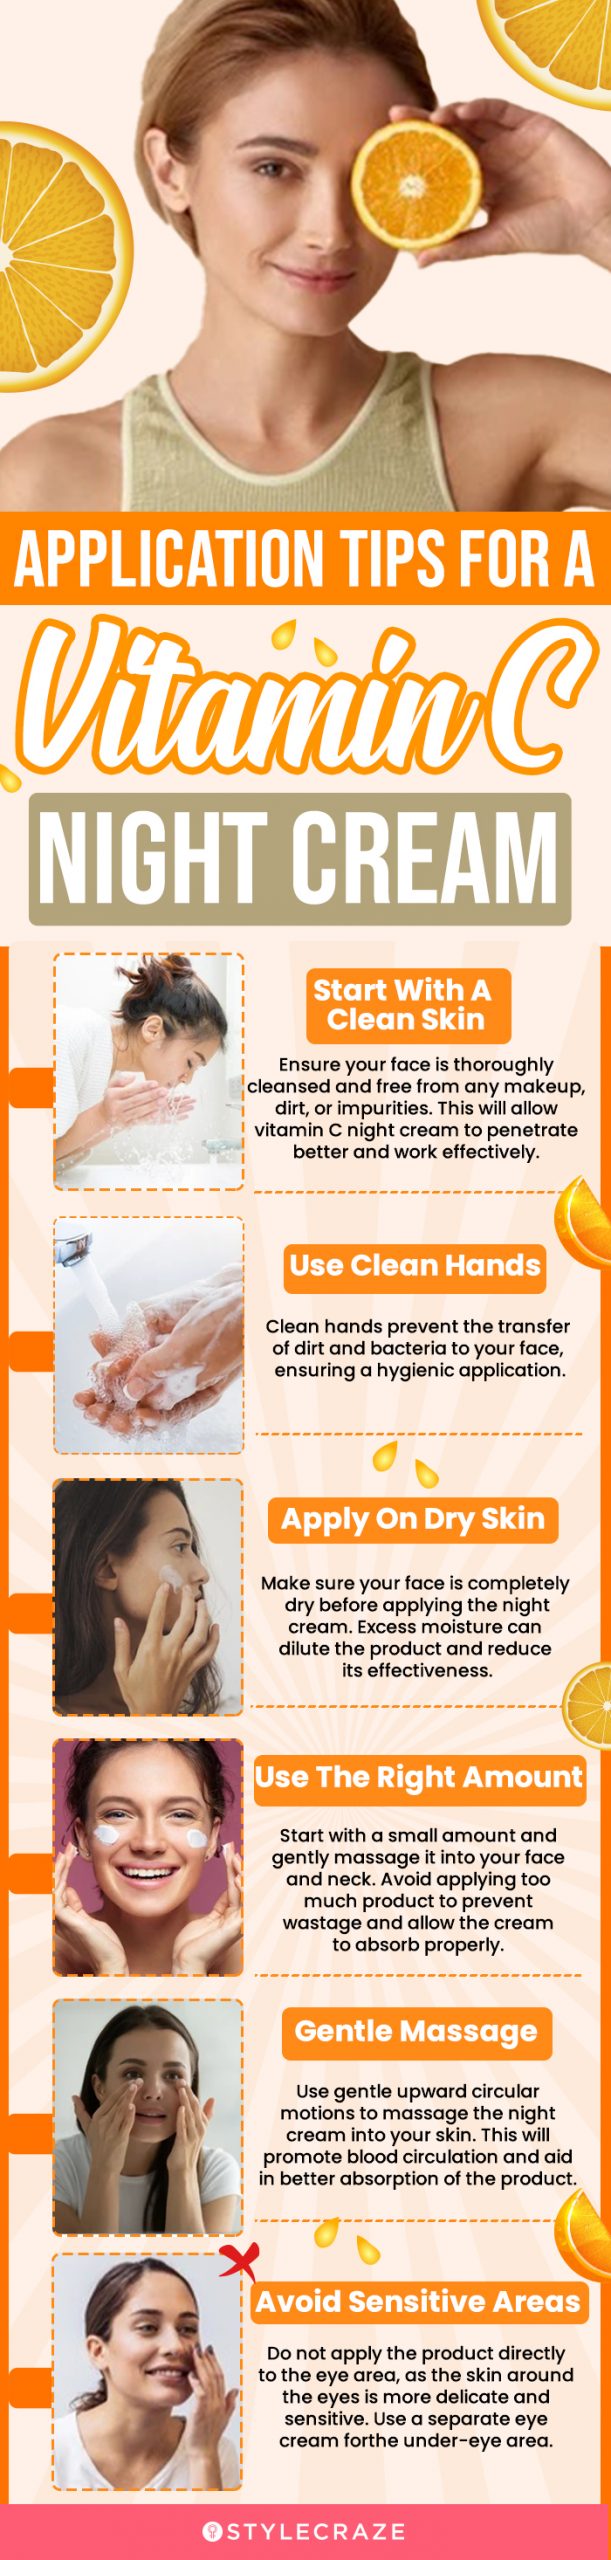 Application Tips For A Vitamin C Night Cream (infographic)